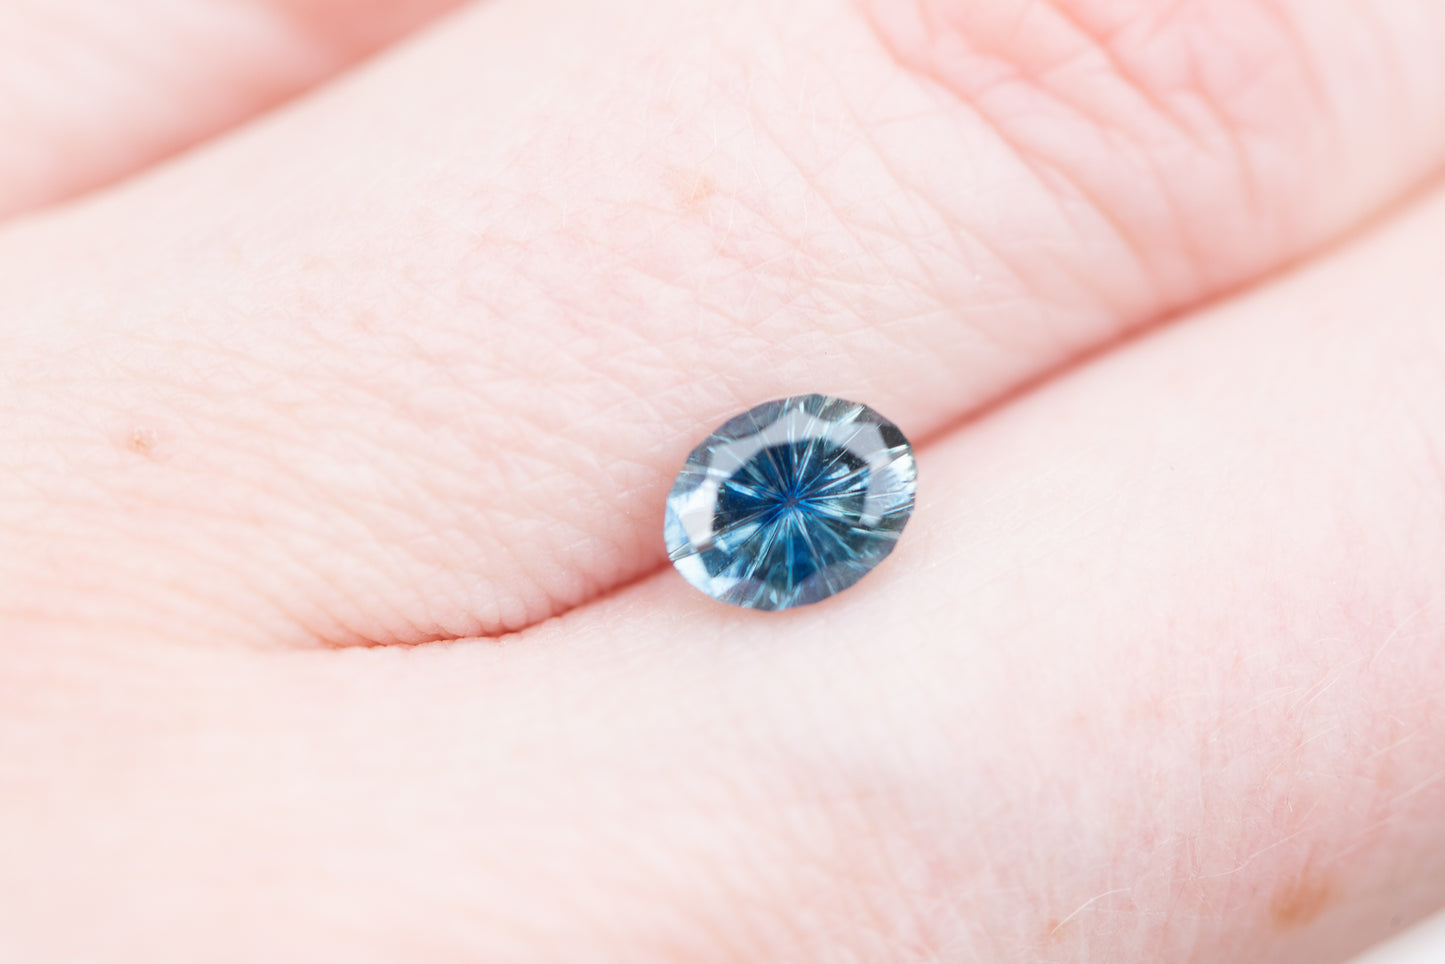 Load image into Gallery viewer, 1.22ct oval blue teal sapphire - starbrite cut by John Dyer
